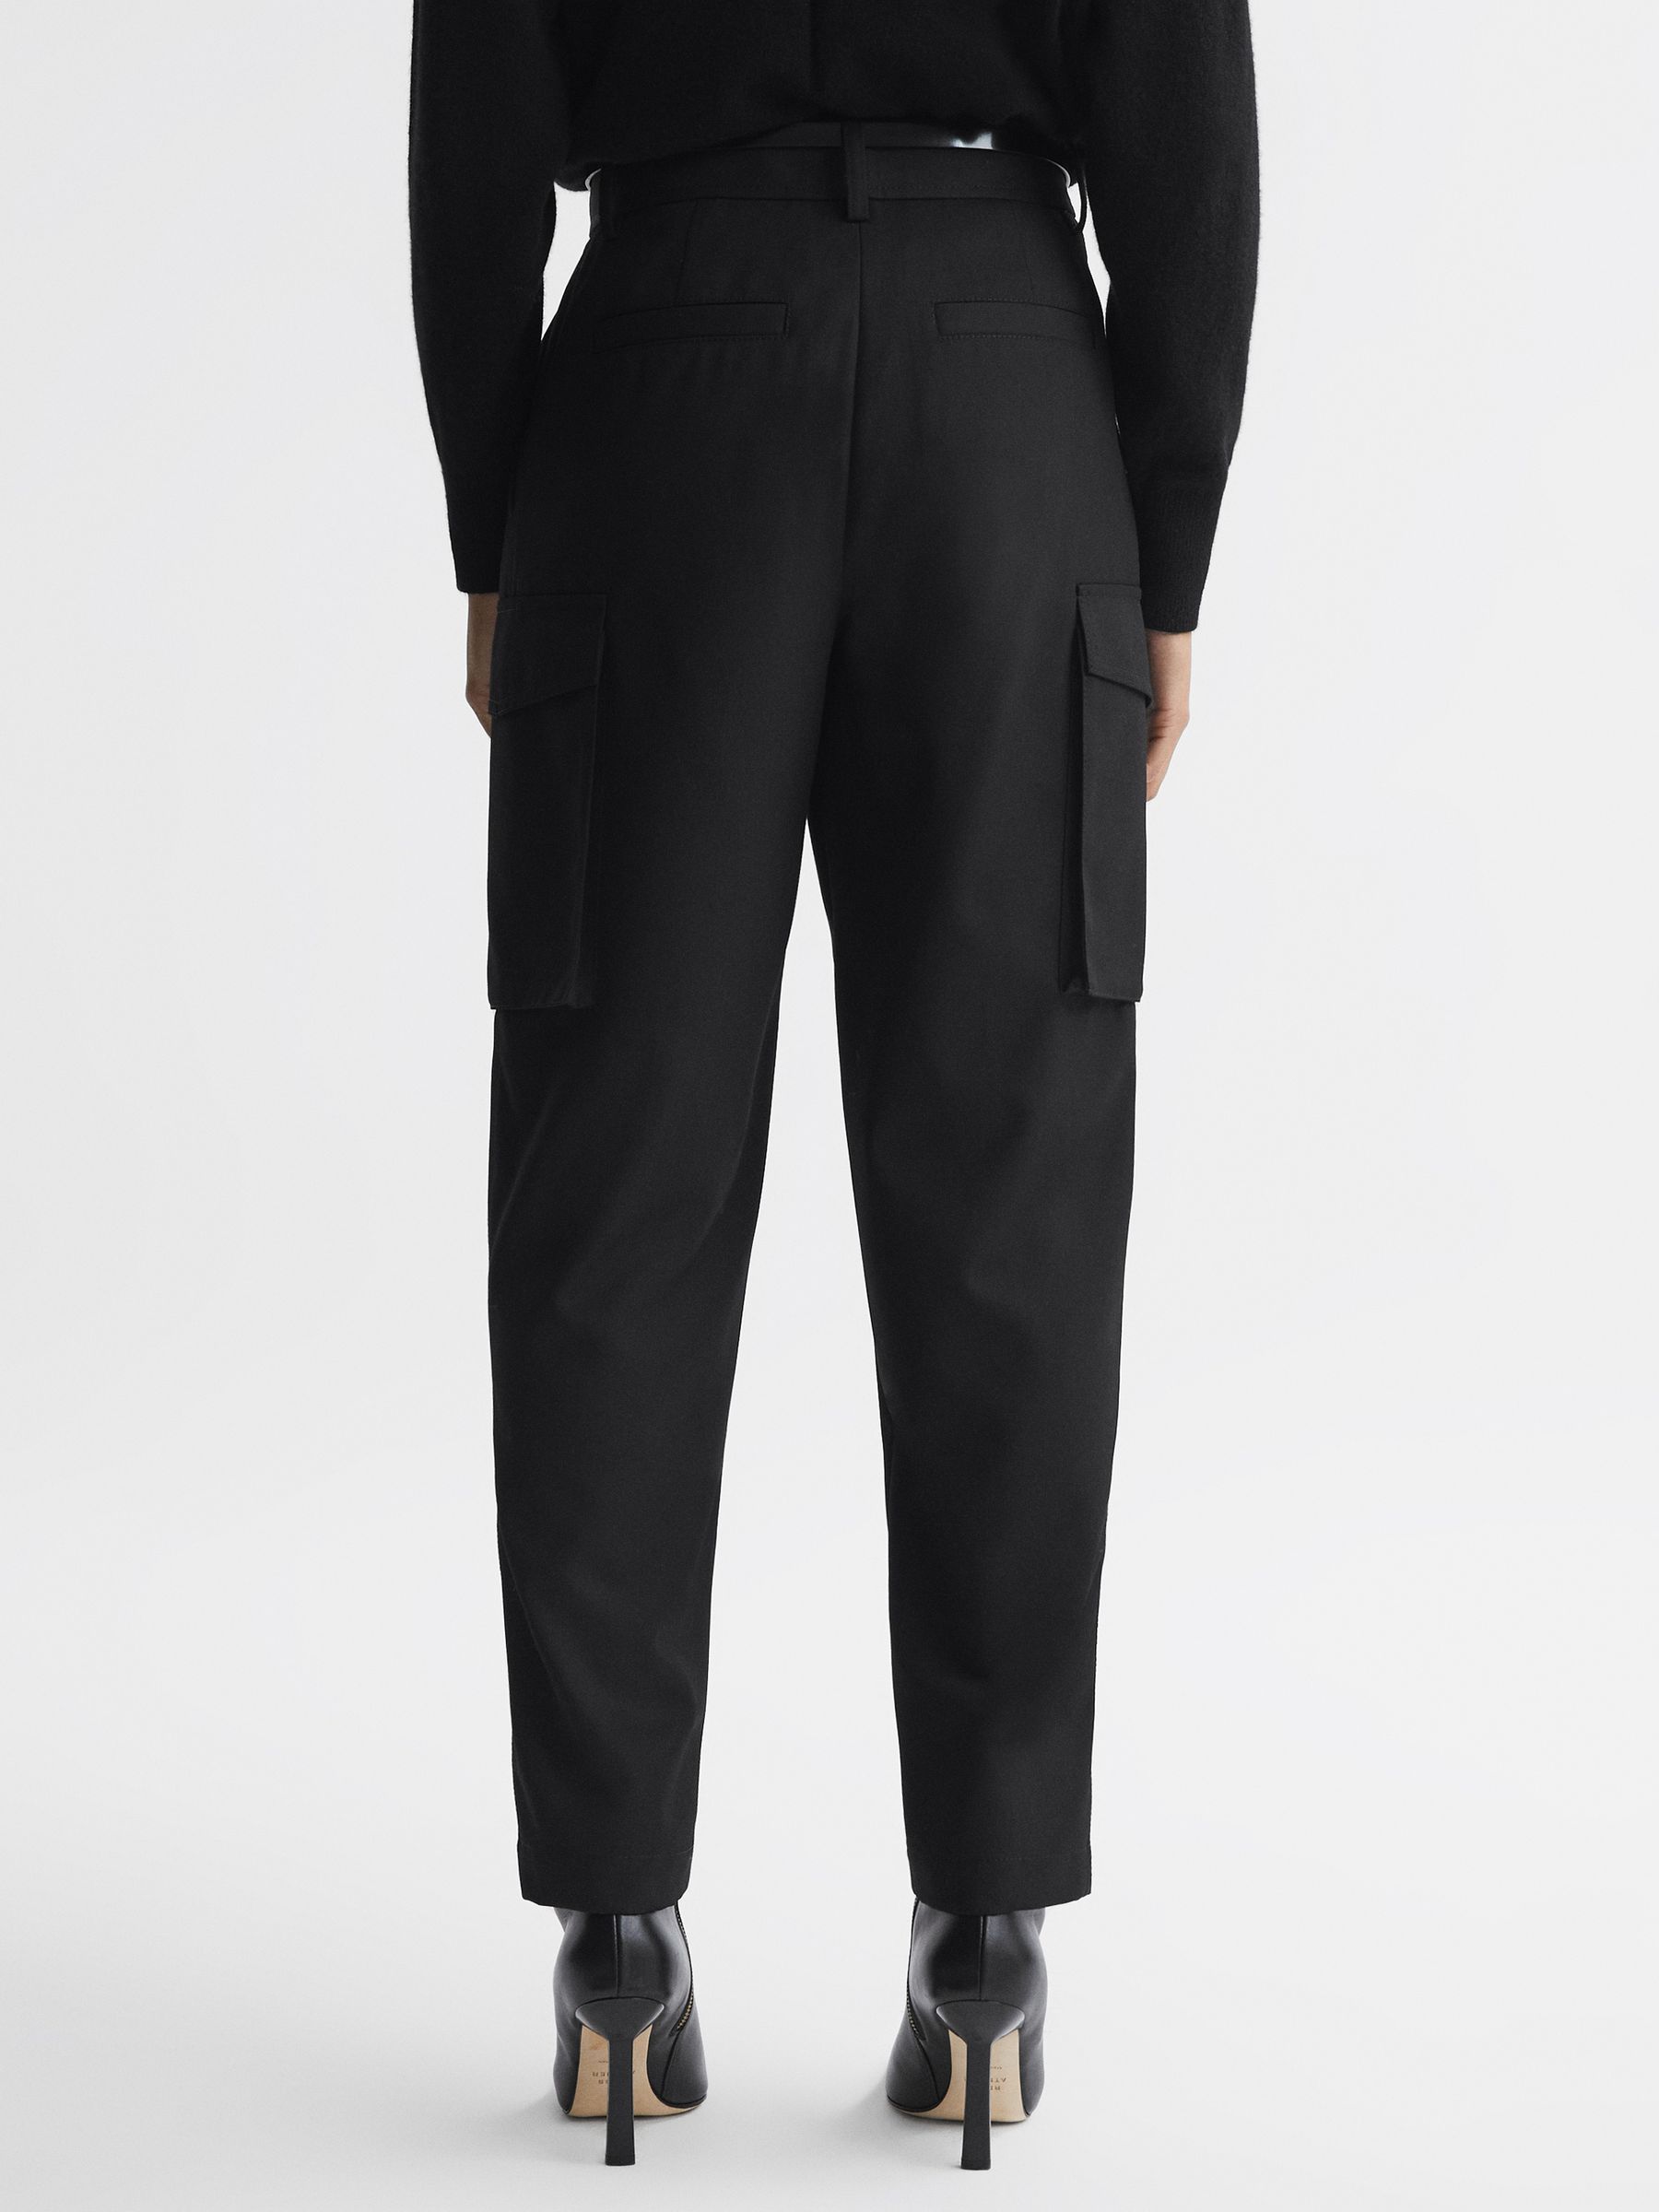 Reiss Violet Mid Rise Cargo Trousers - REISS